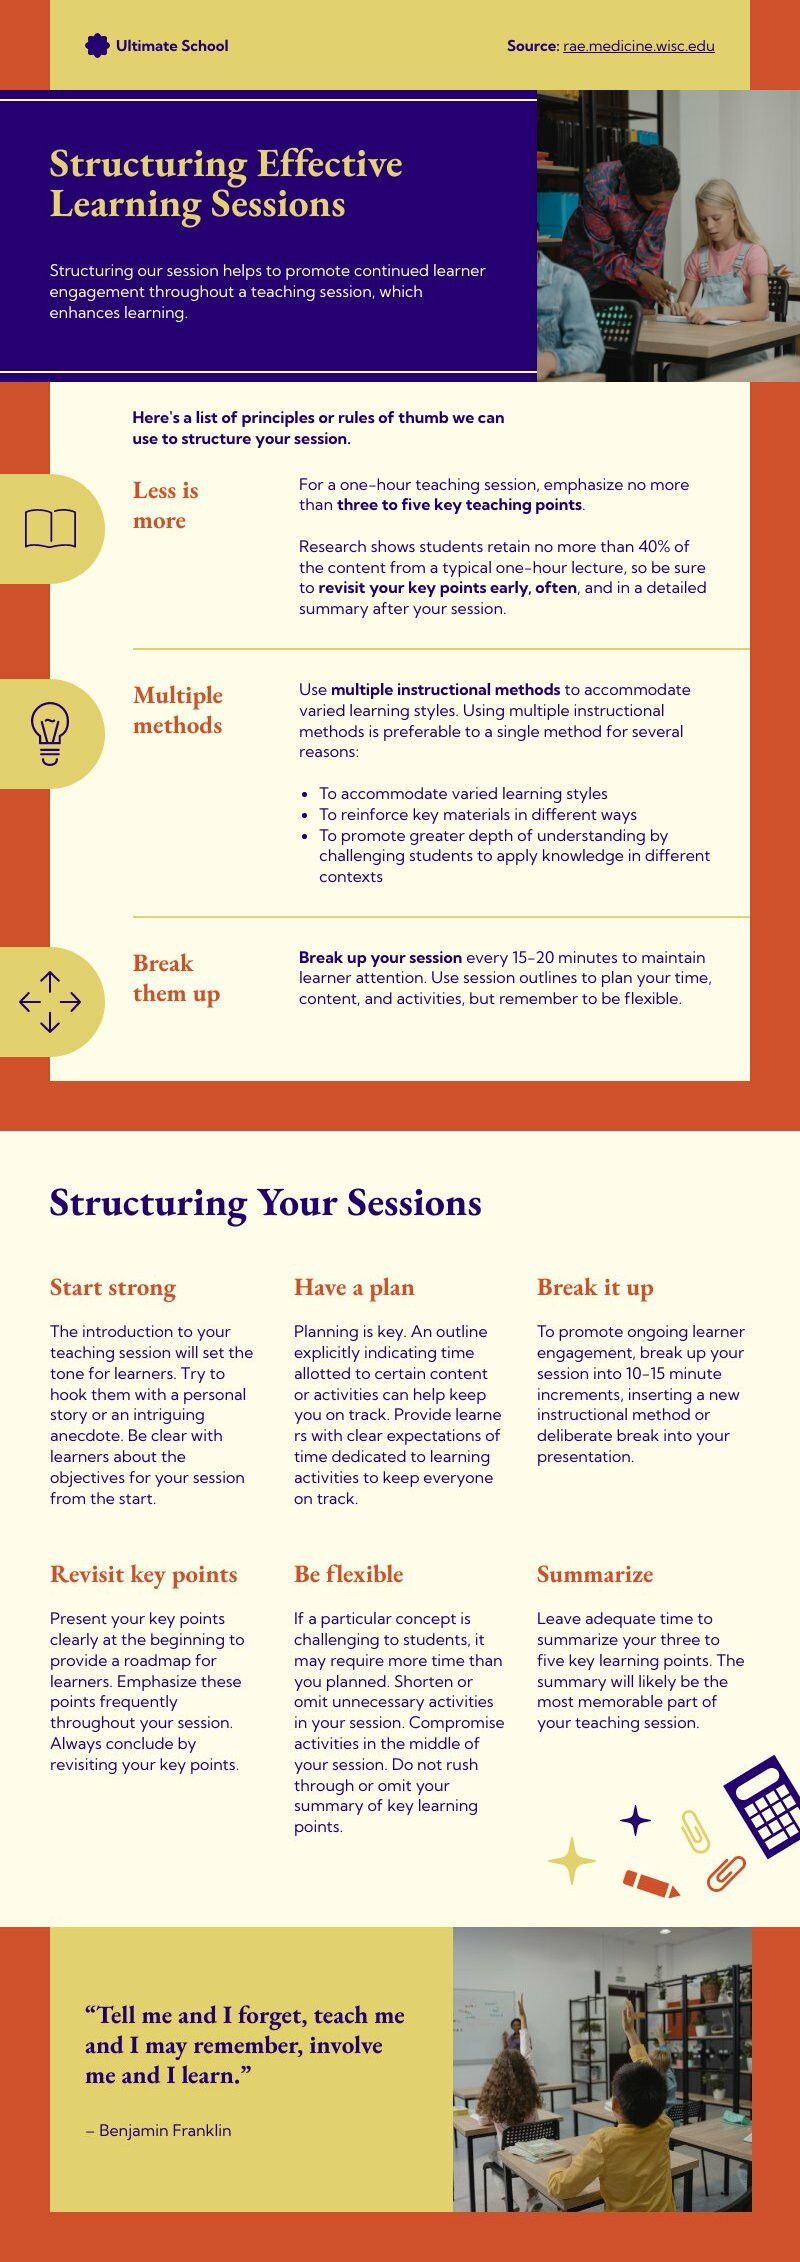 Teaching Session Plan for Structuring Effective Learning Sessions